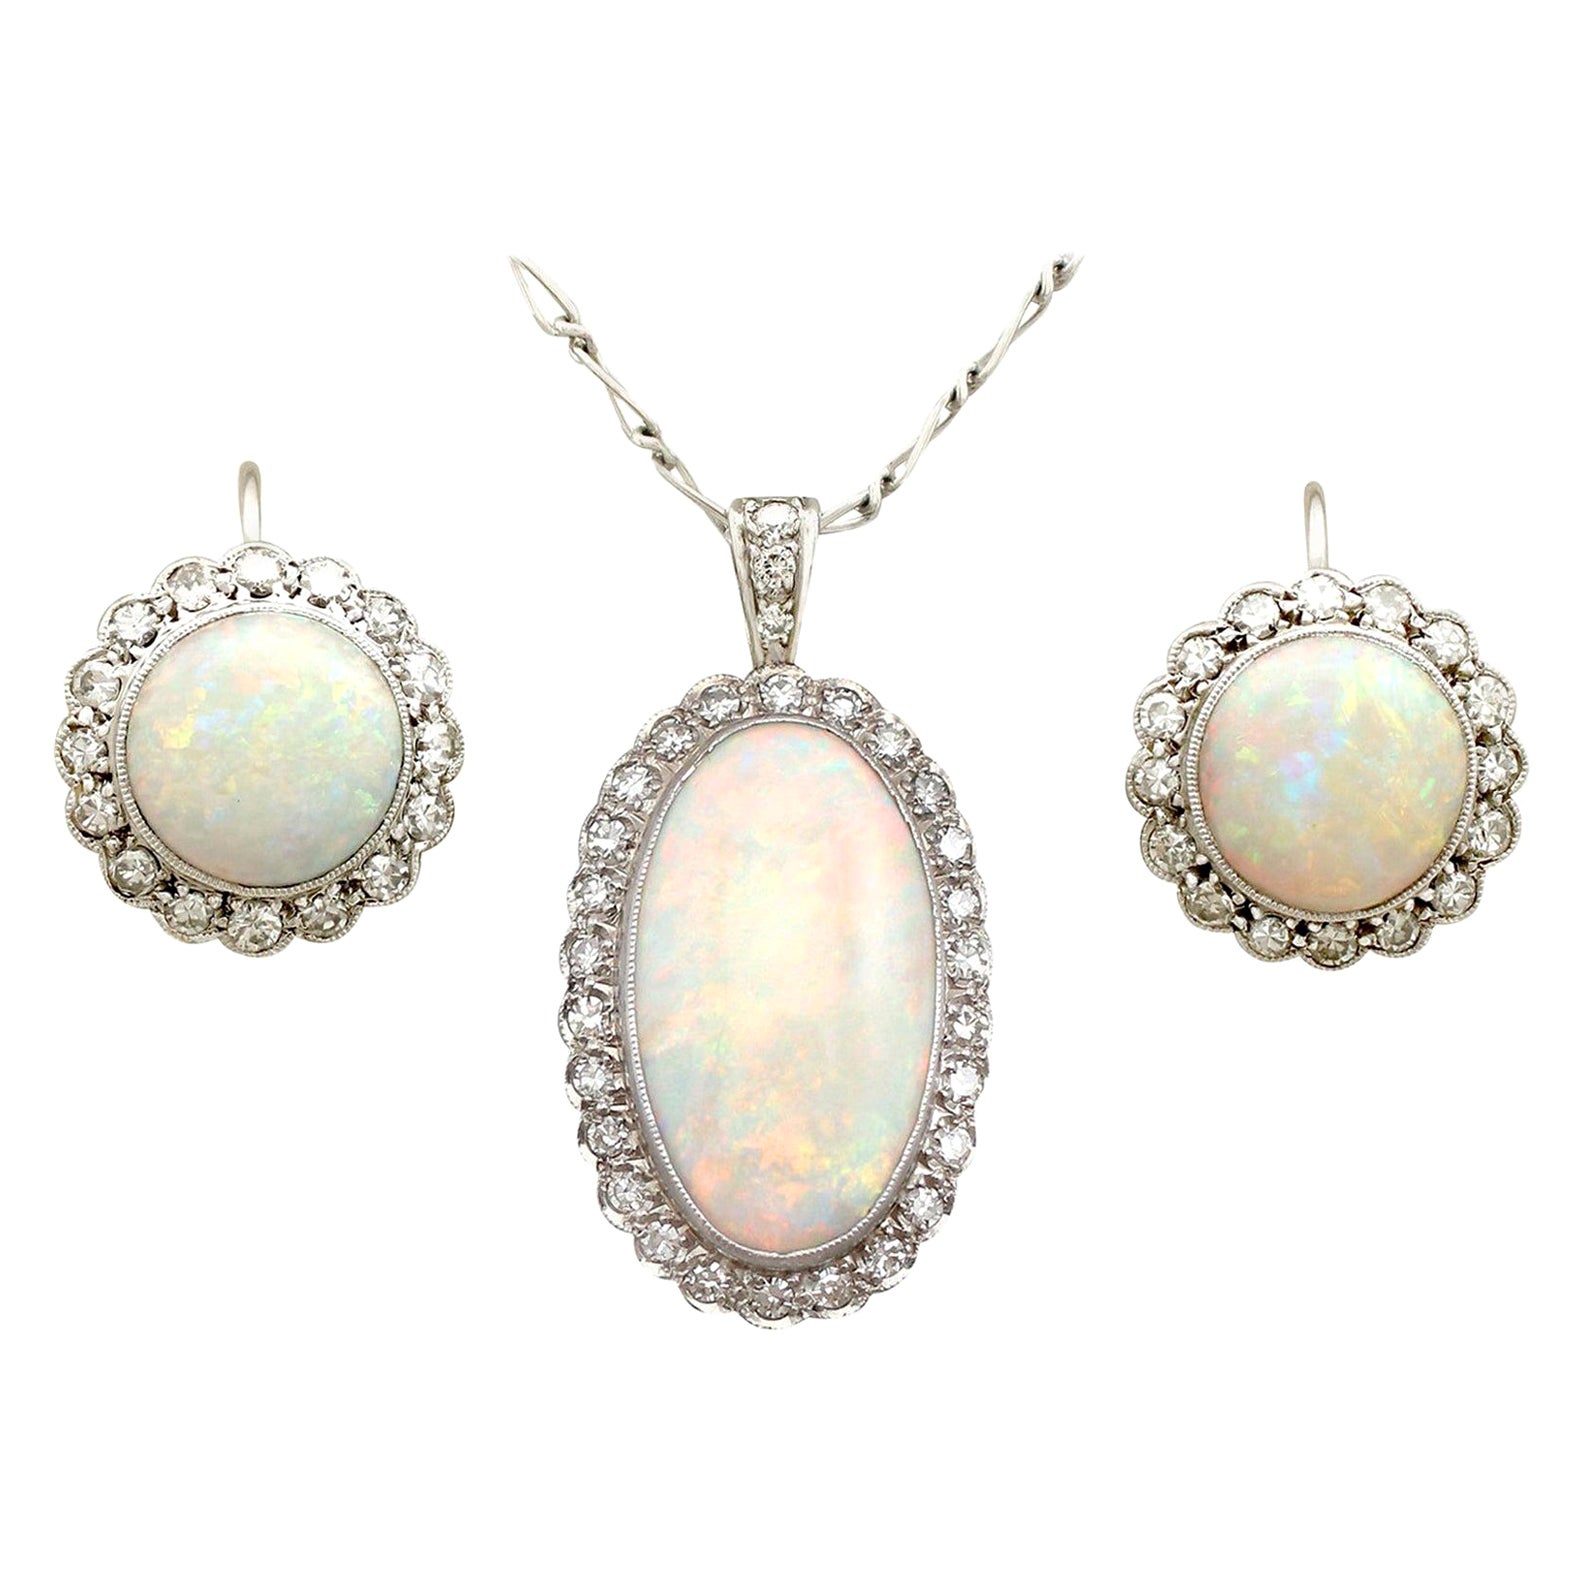 1920s 8.18 Carat Opal and Diamond Earring and Pendant Set For Sale